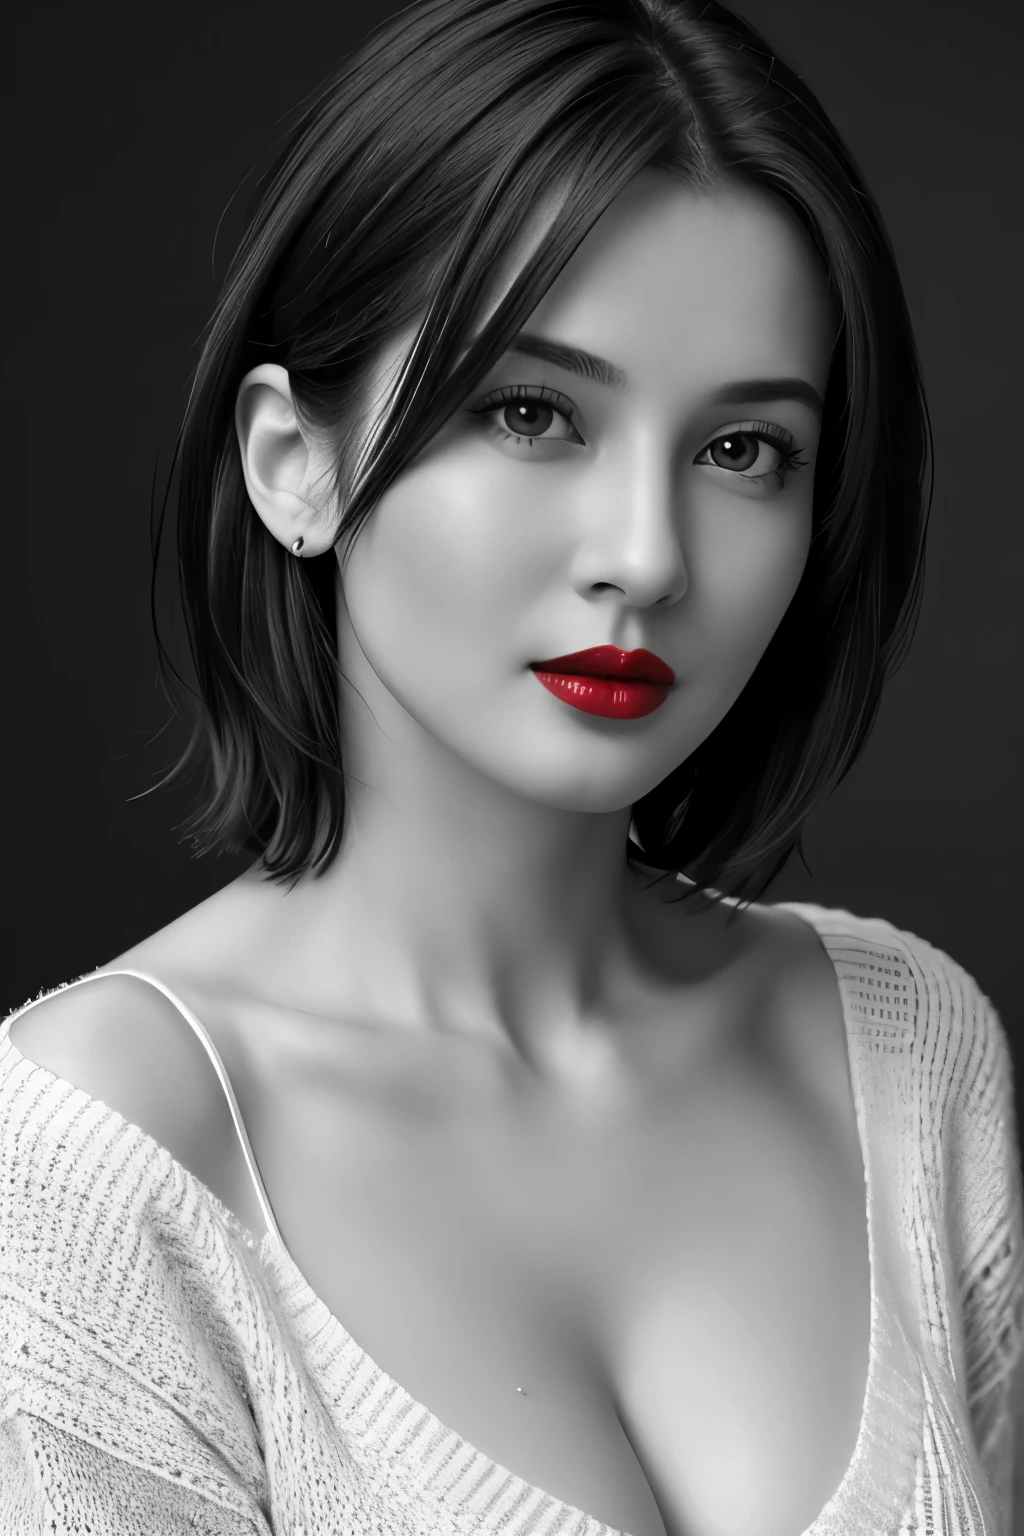 Tabletop, highest quality, Photorealistic, Very detailed, finely, High resolution, 8k wallpaper, RAW Photos, Professional, High level of detail, 1 girl, (((Black and white photography))), (((Red lips))), ((Looking at the camera)), (Look forward), Upper Body, short hair, Bob Hair, (Straight Hair), Shapely breasts, Cleavage, V-neck light knit sweater